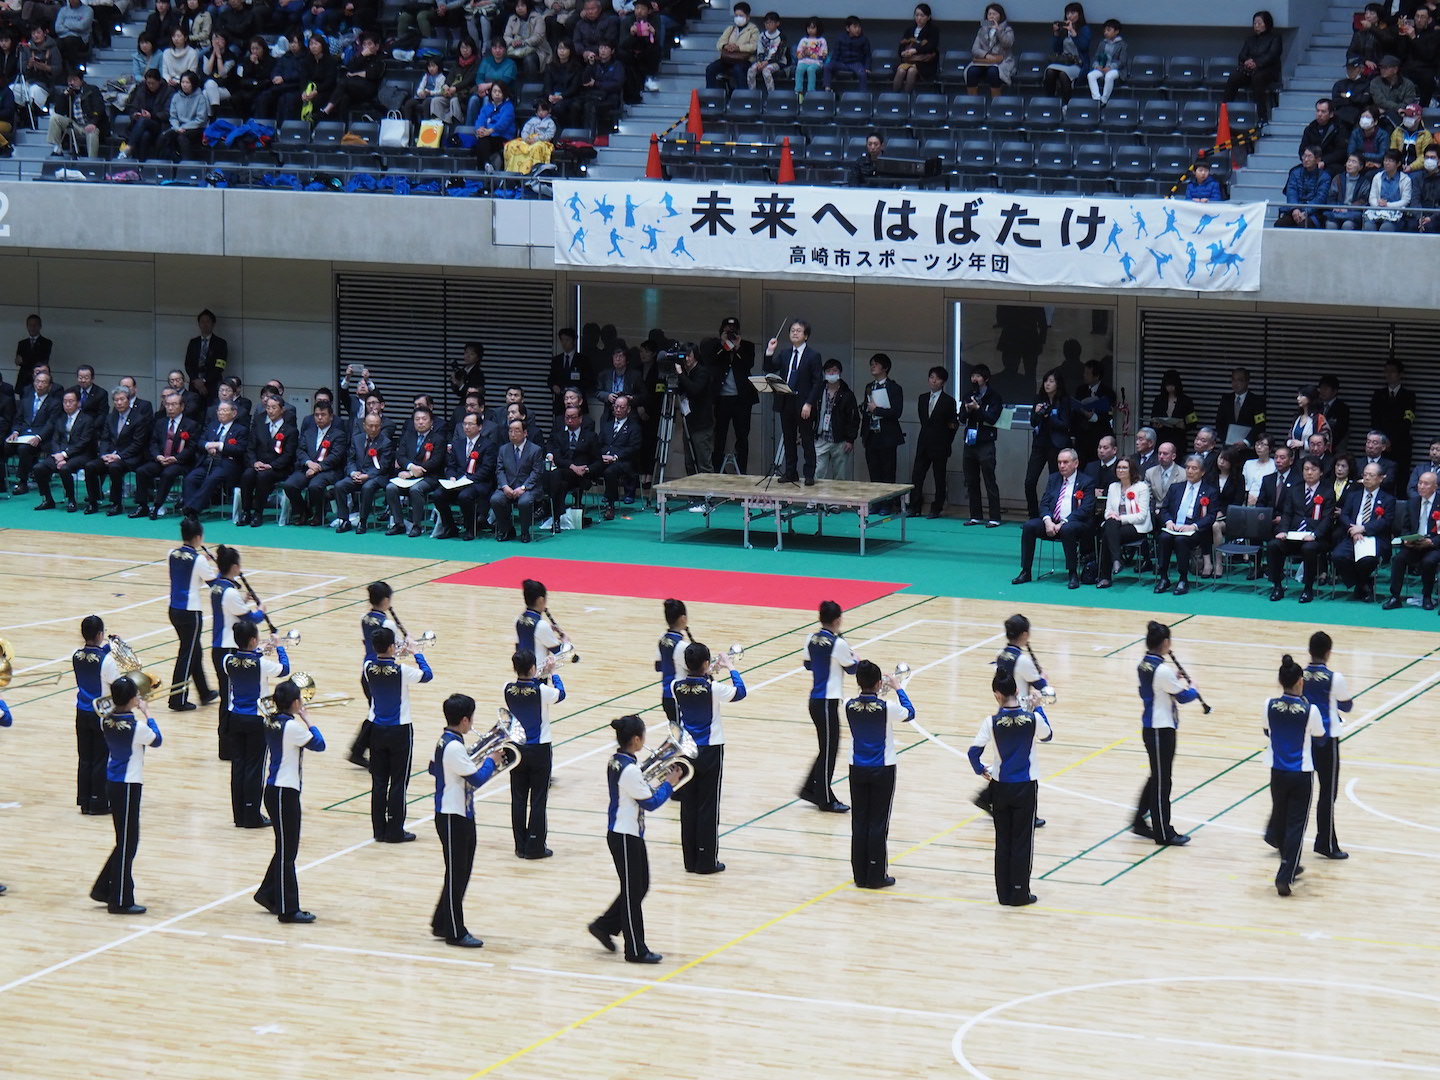 Takasaki Arena Opening Ceremony<br />Performed by<br />The Tsukasawa Junior High School Marching Band 3